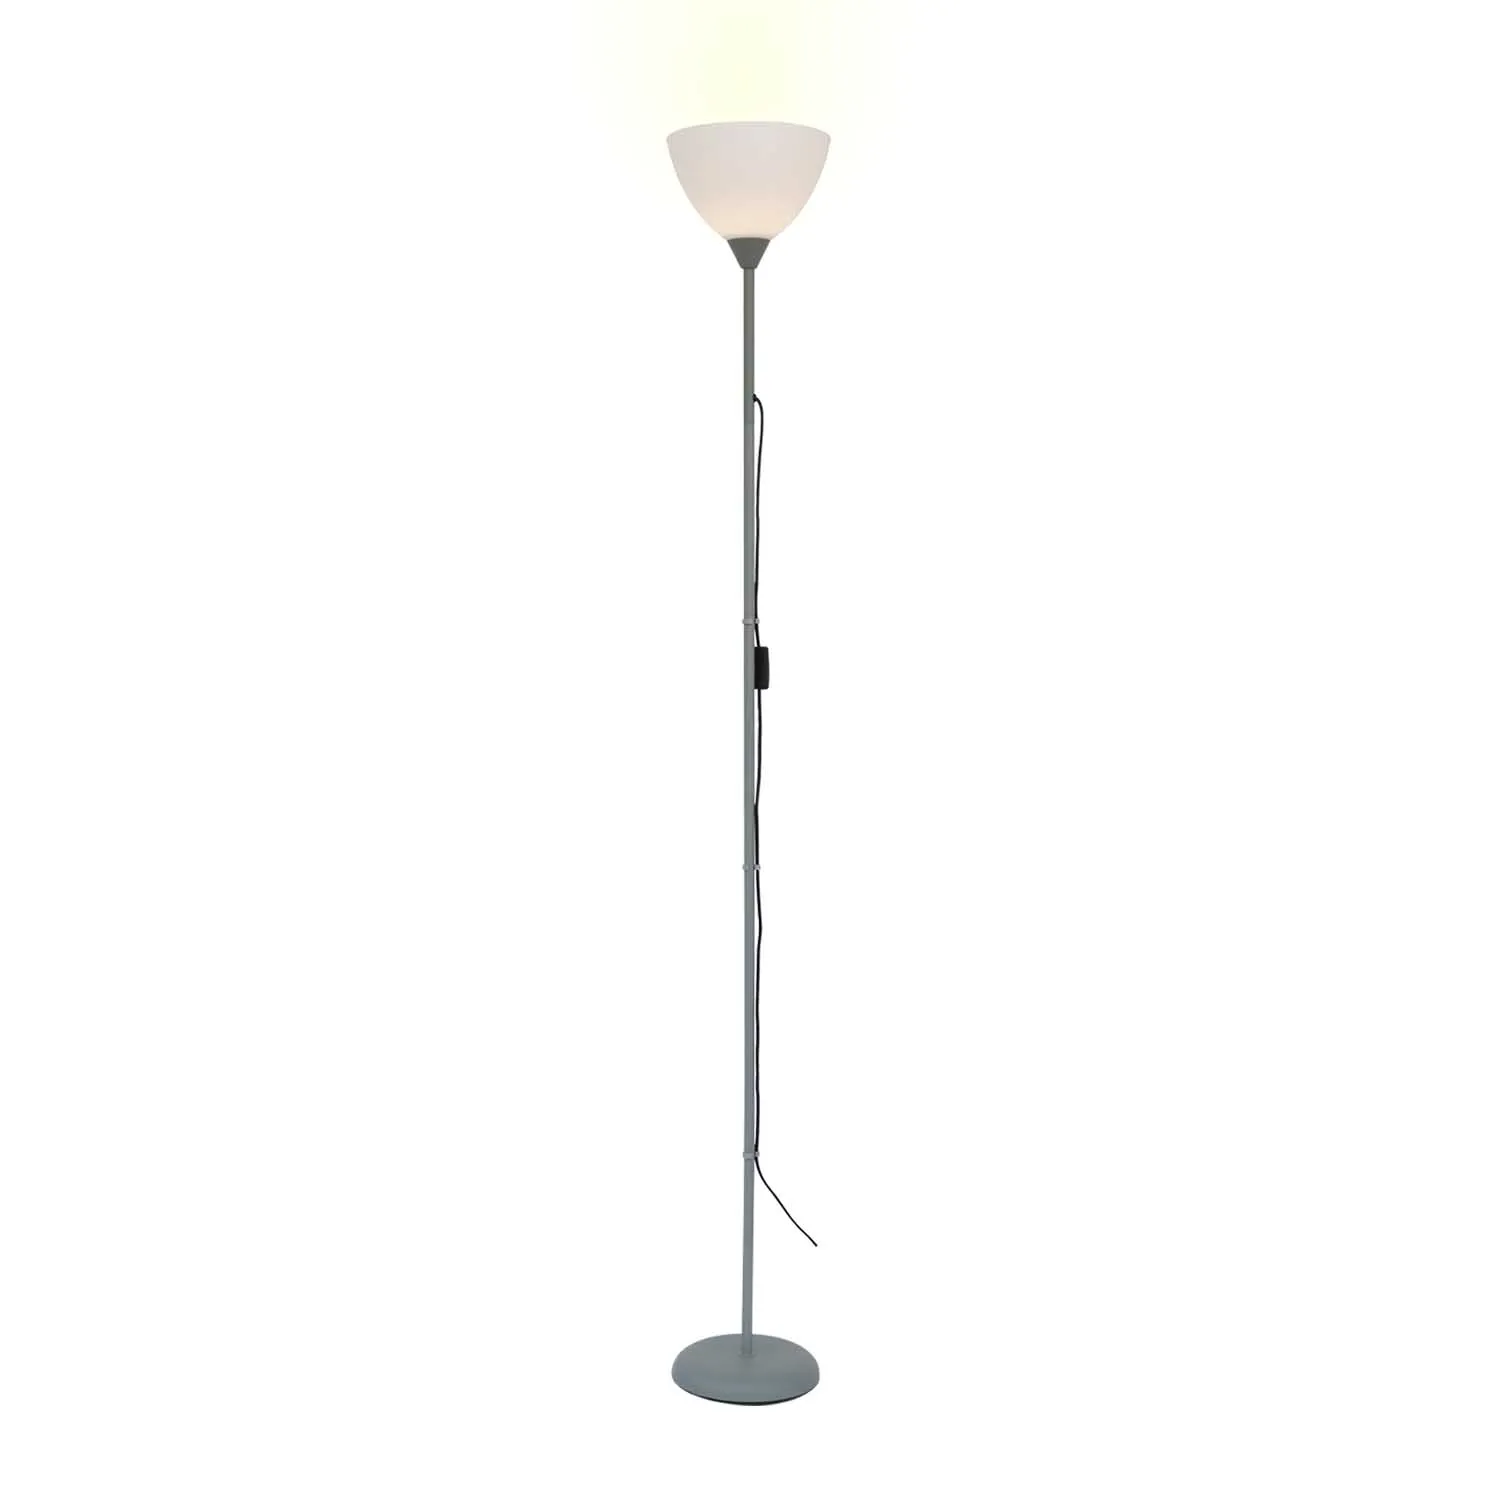 Th Cordelia B olie Hot Sell Flexible One Pole Floor Lamp Industrial 60w With Grey Color  Crystal Standing Lamps Home Customize Corner Floor Lamp - Buy E14 Max 60w  Floor Lamp,Floor Lamp,Lamp Floor Product on Alibaba.com